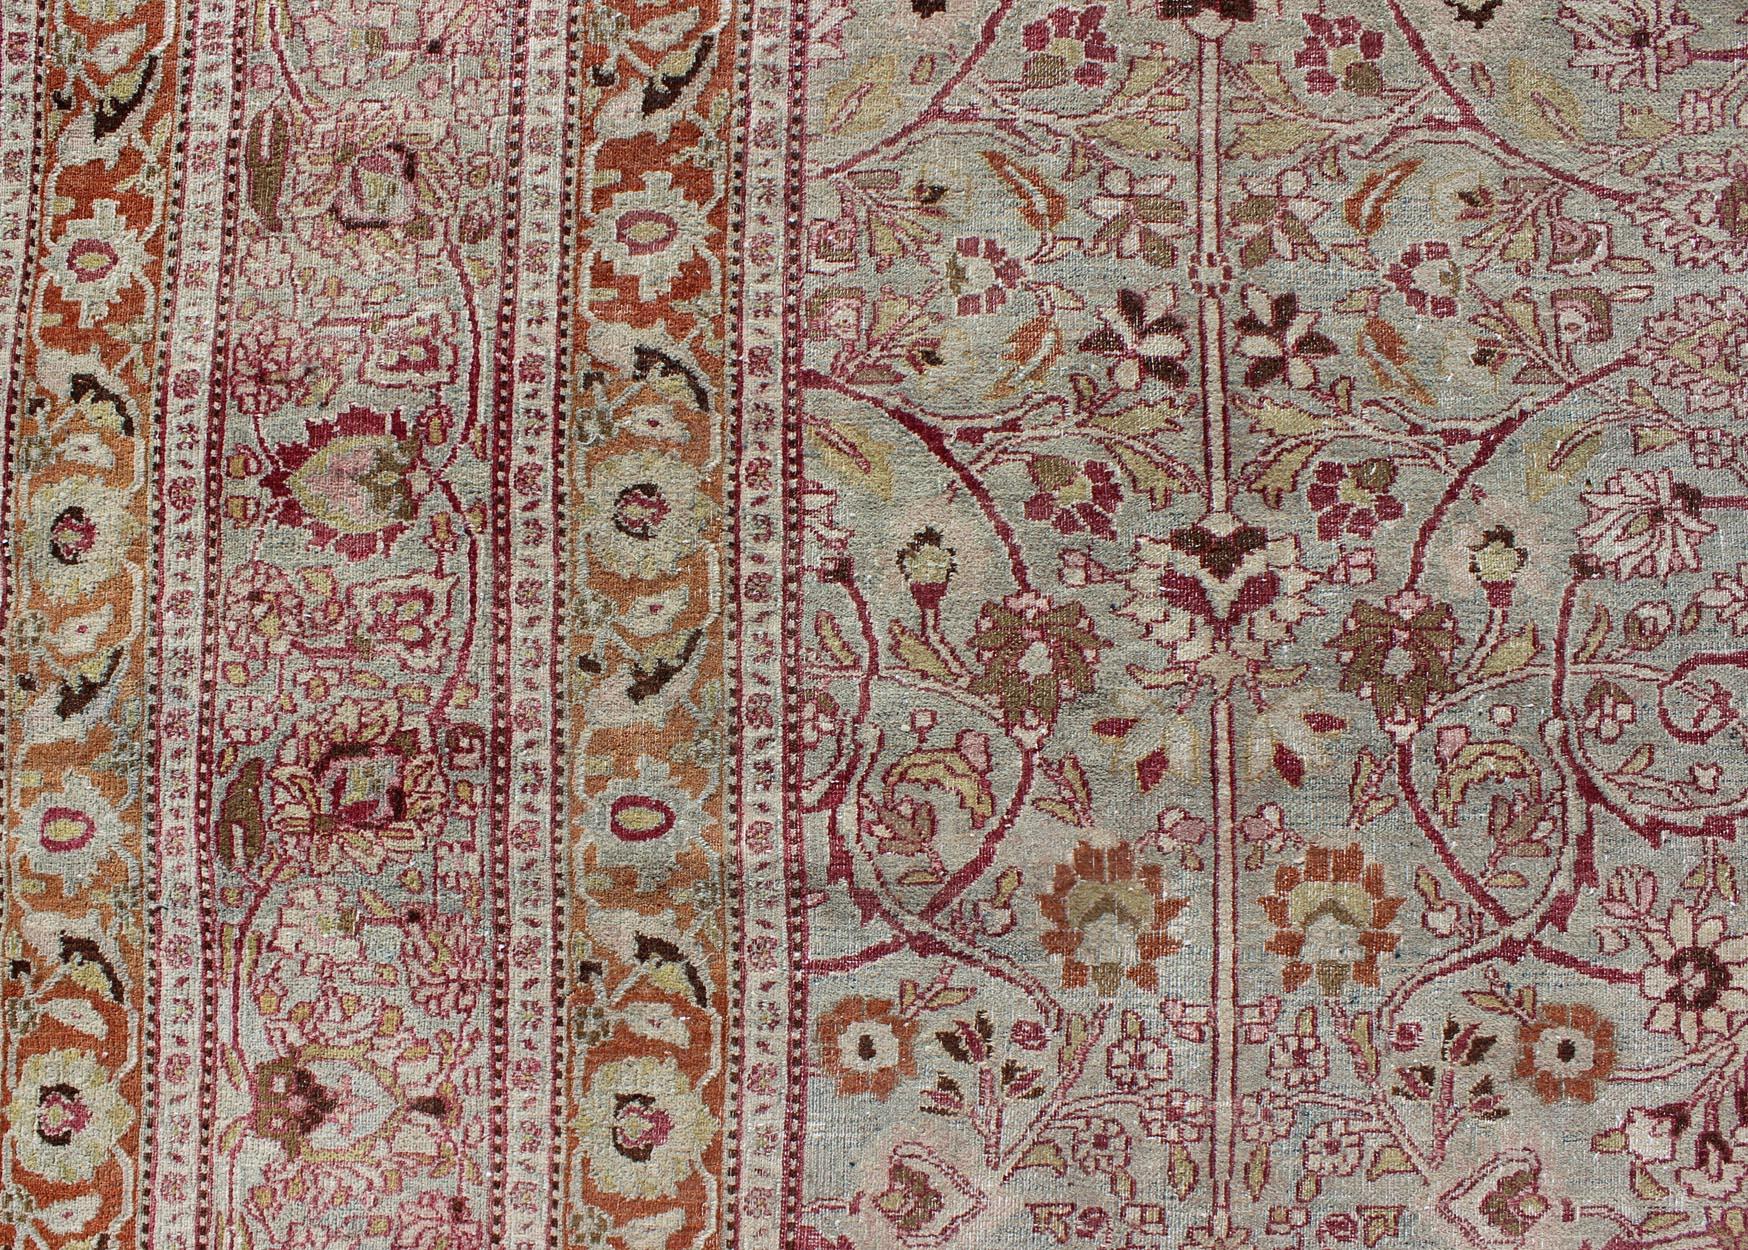 Antique Persian Khorassan Rug with All-Over Floral Design in Orange, Red, Pink For Sale 2